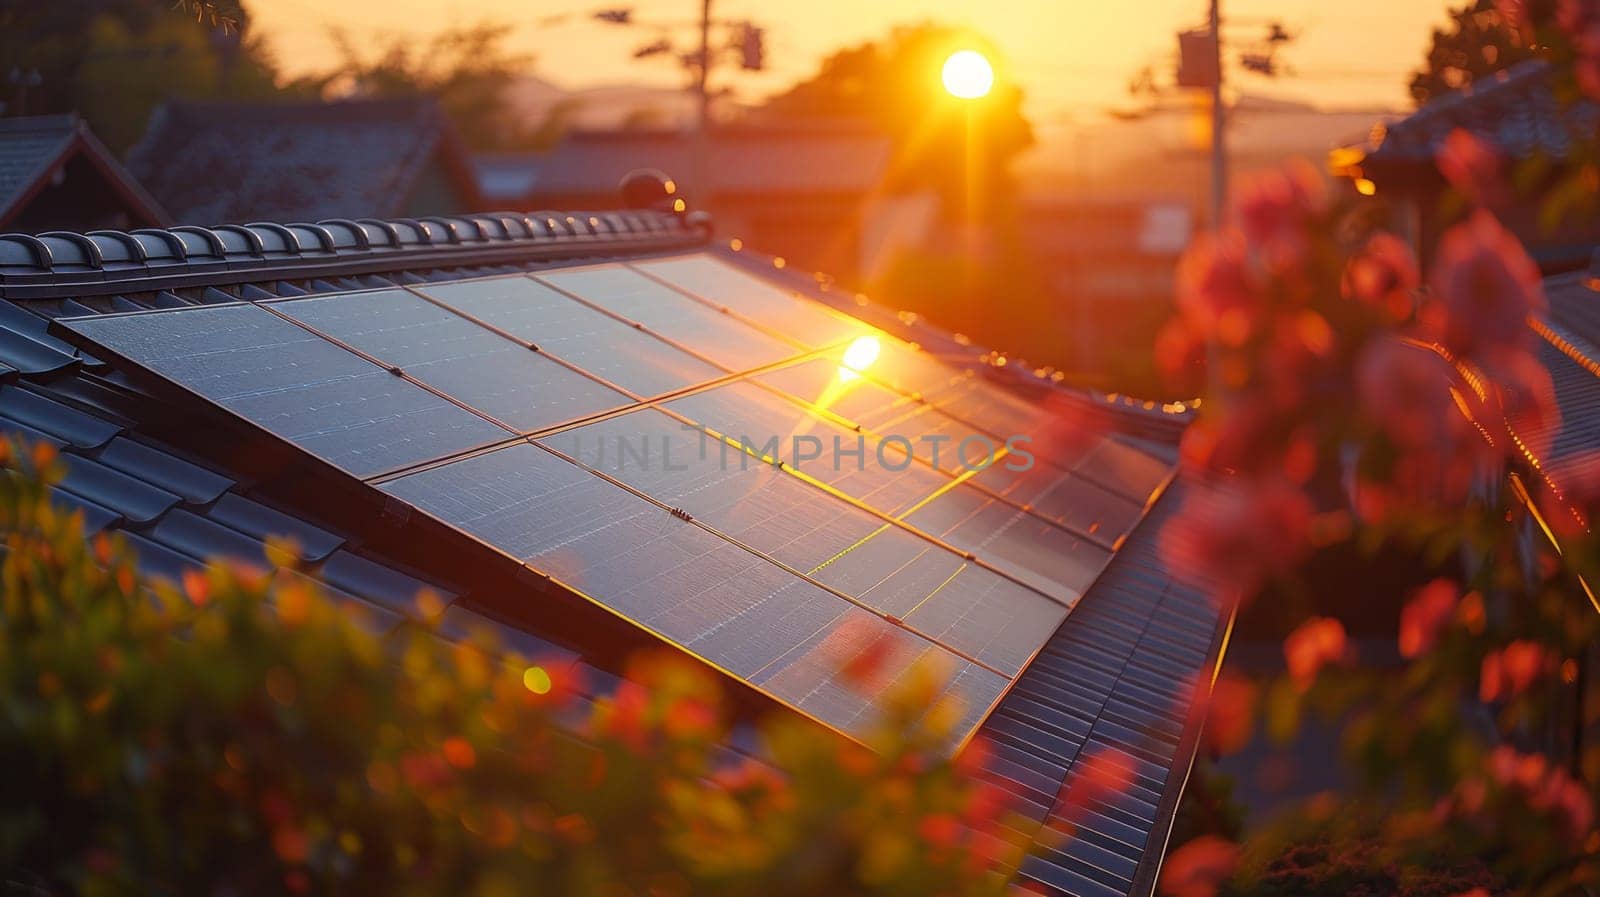 A solar panel absorbs the suns final rays on a rooftop at sunset, harnessing renewable energy for a greener world by but_photo